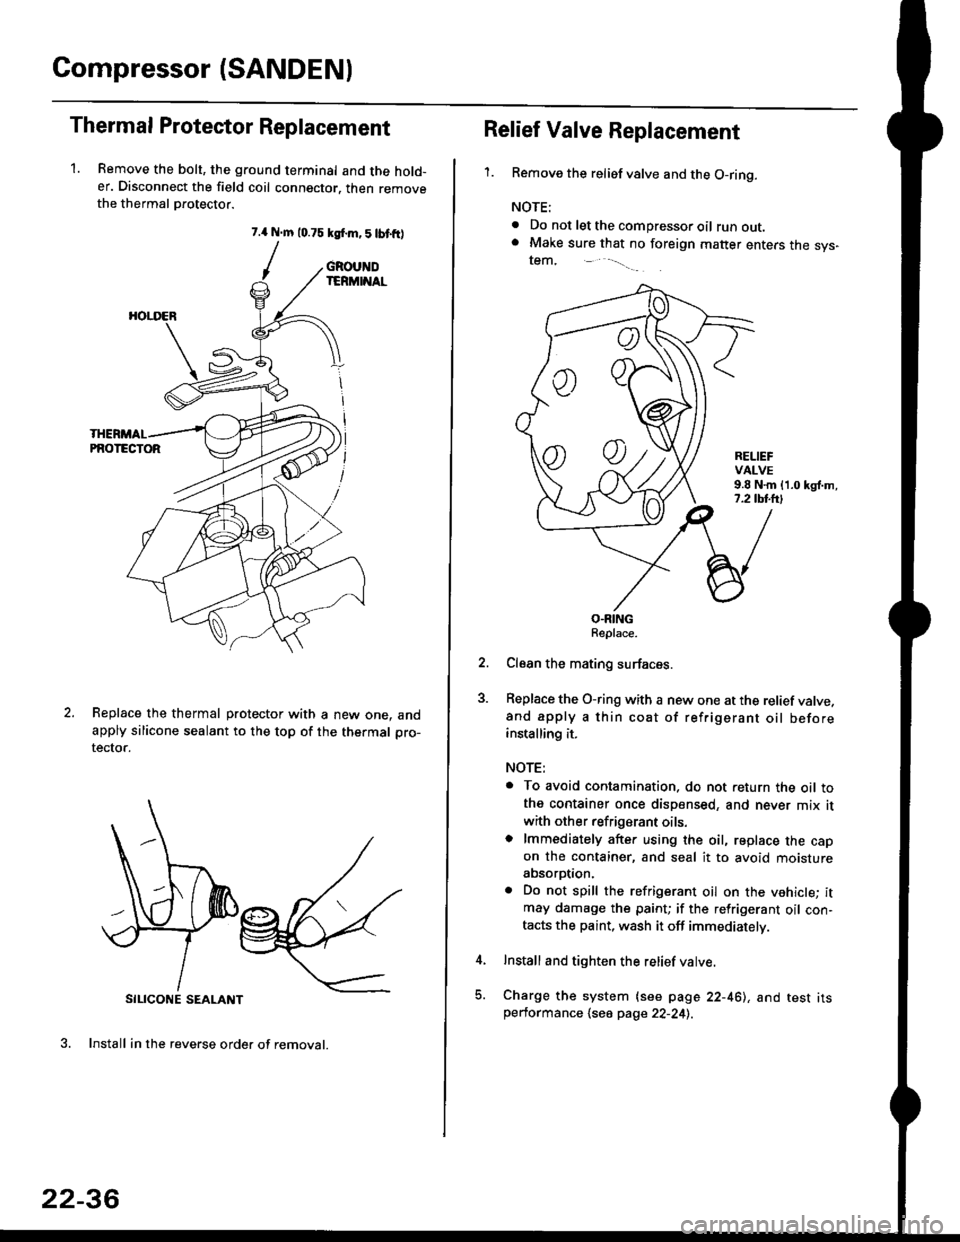 HONDA CIVIC 1999 6.G Workshop Manual Compressor (SANDENI
Thermal Protestor Replacement
1. Remove the bolt, the ground terminal and the hold-er. Disconnect the field coil connector. then removethe thermal Drotector.
7.{ N.m 10.75 ksf.m,5l